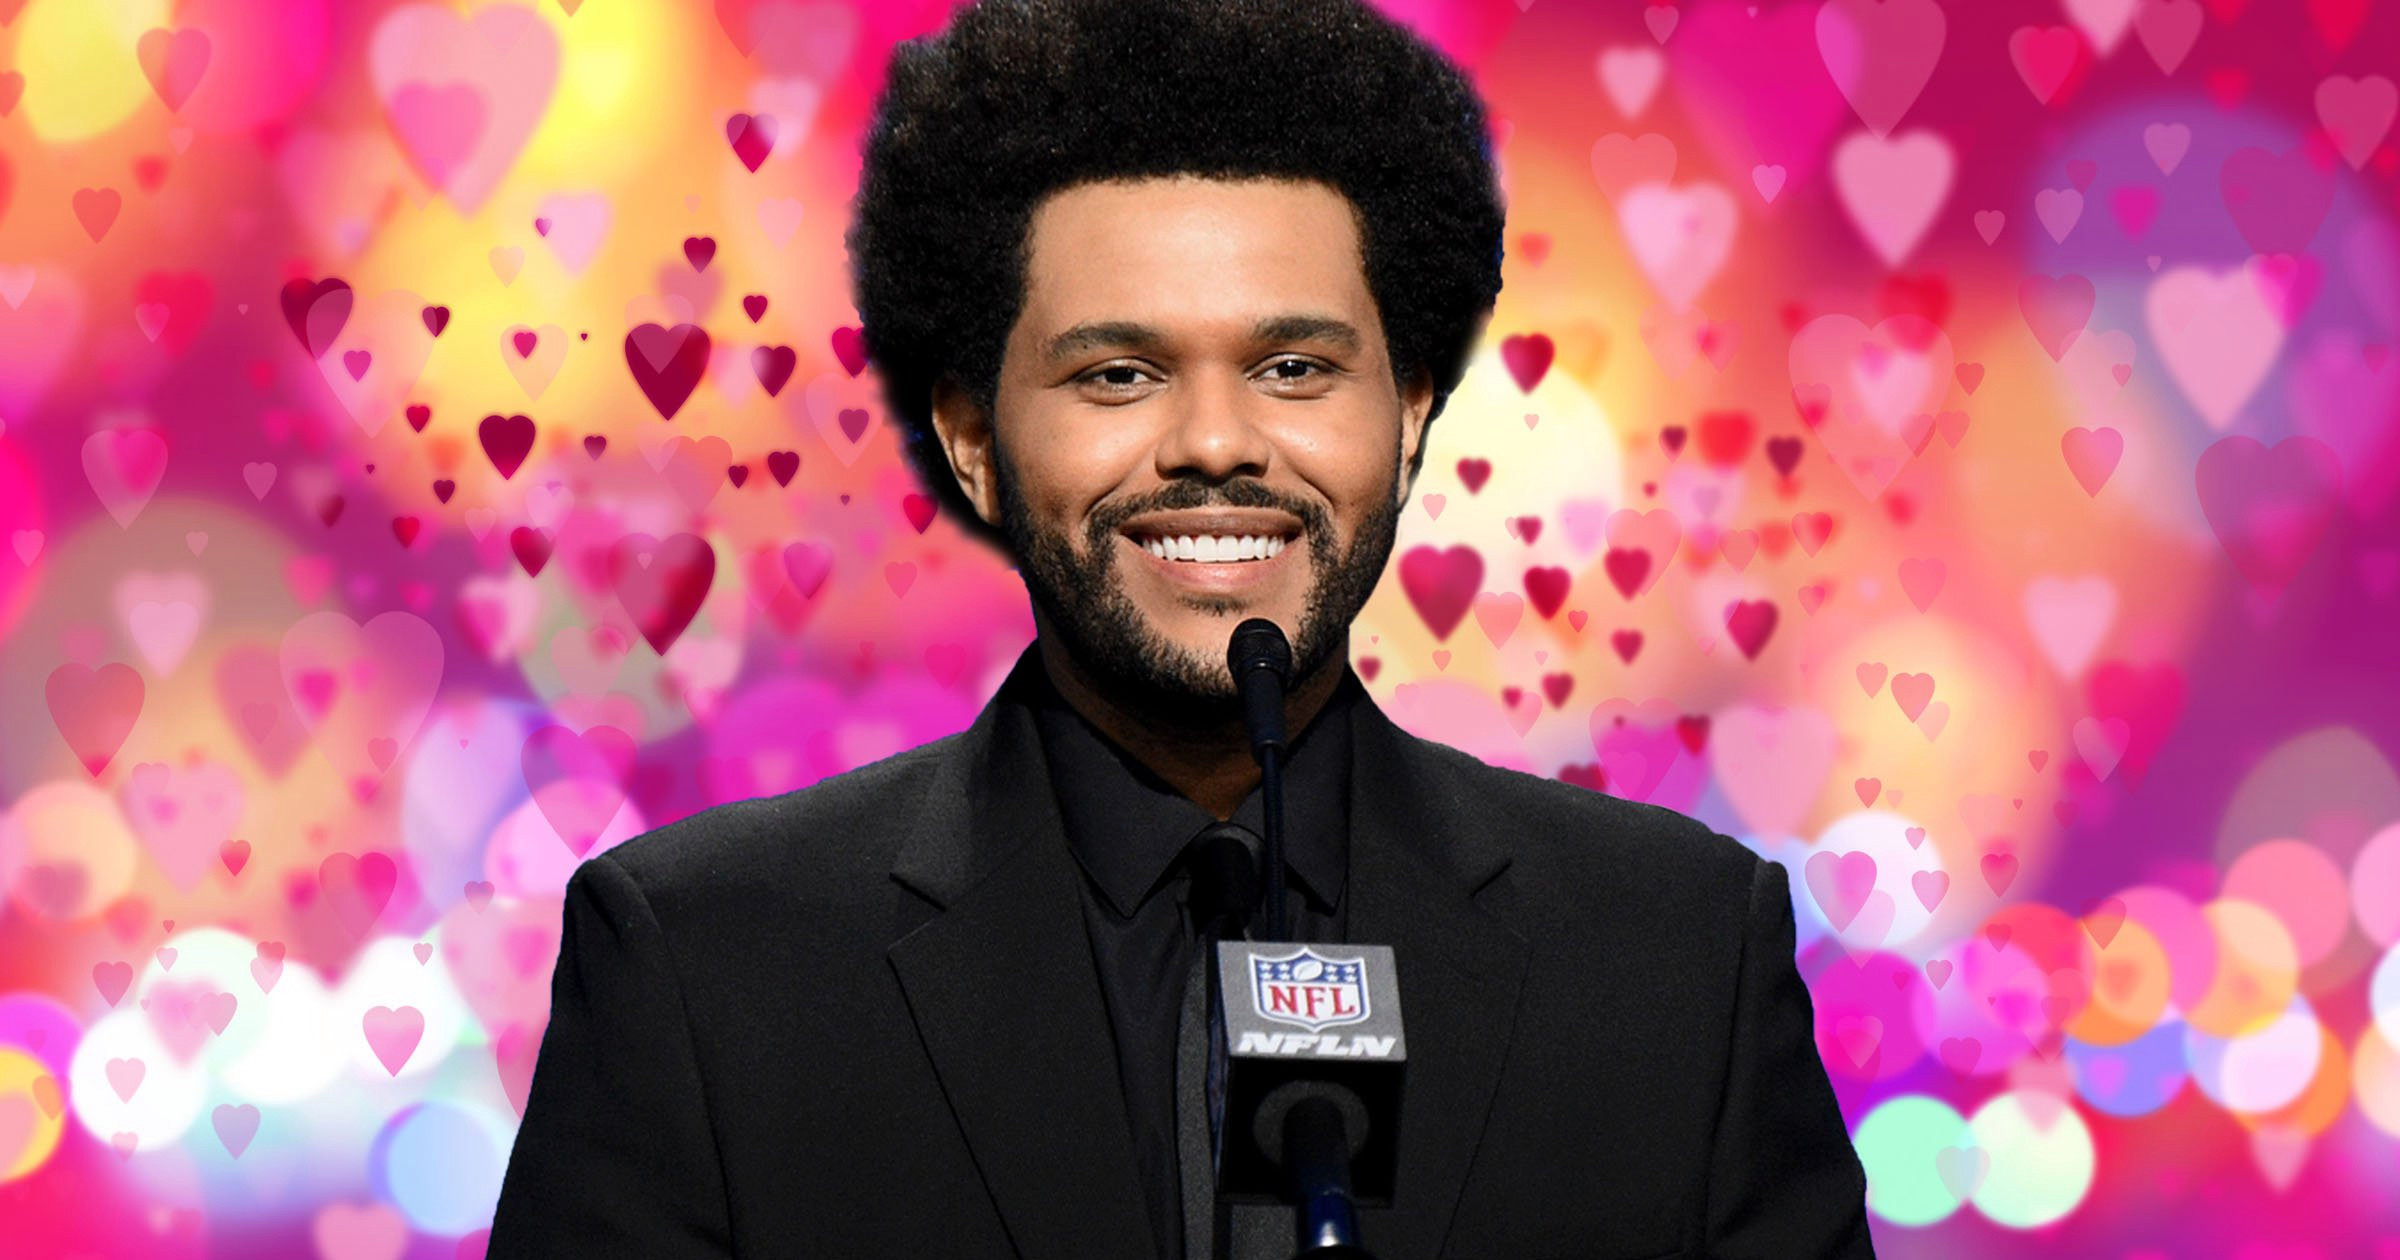 Super Bowl 2021 halftime show: Who is The Weeknd dating?